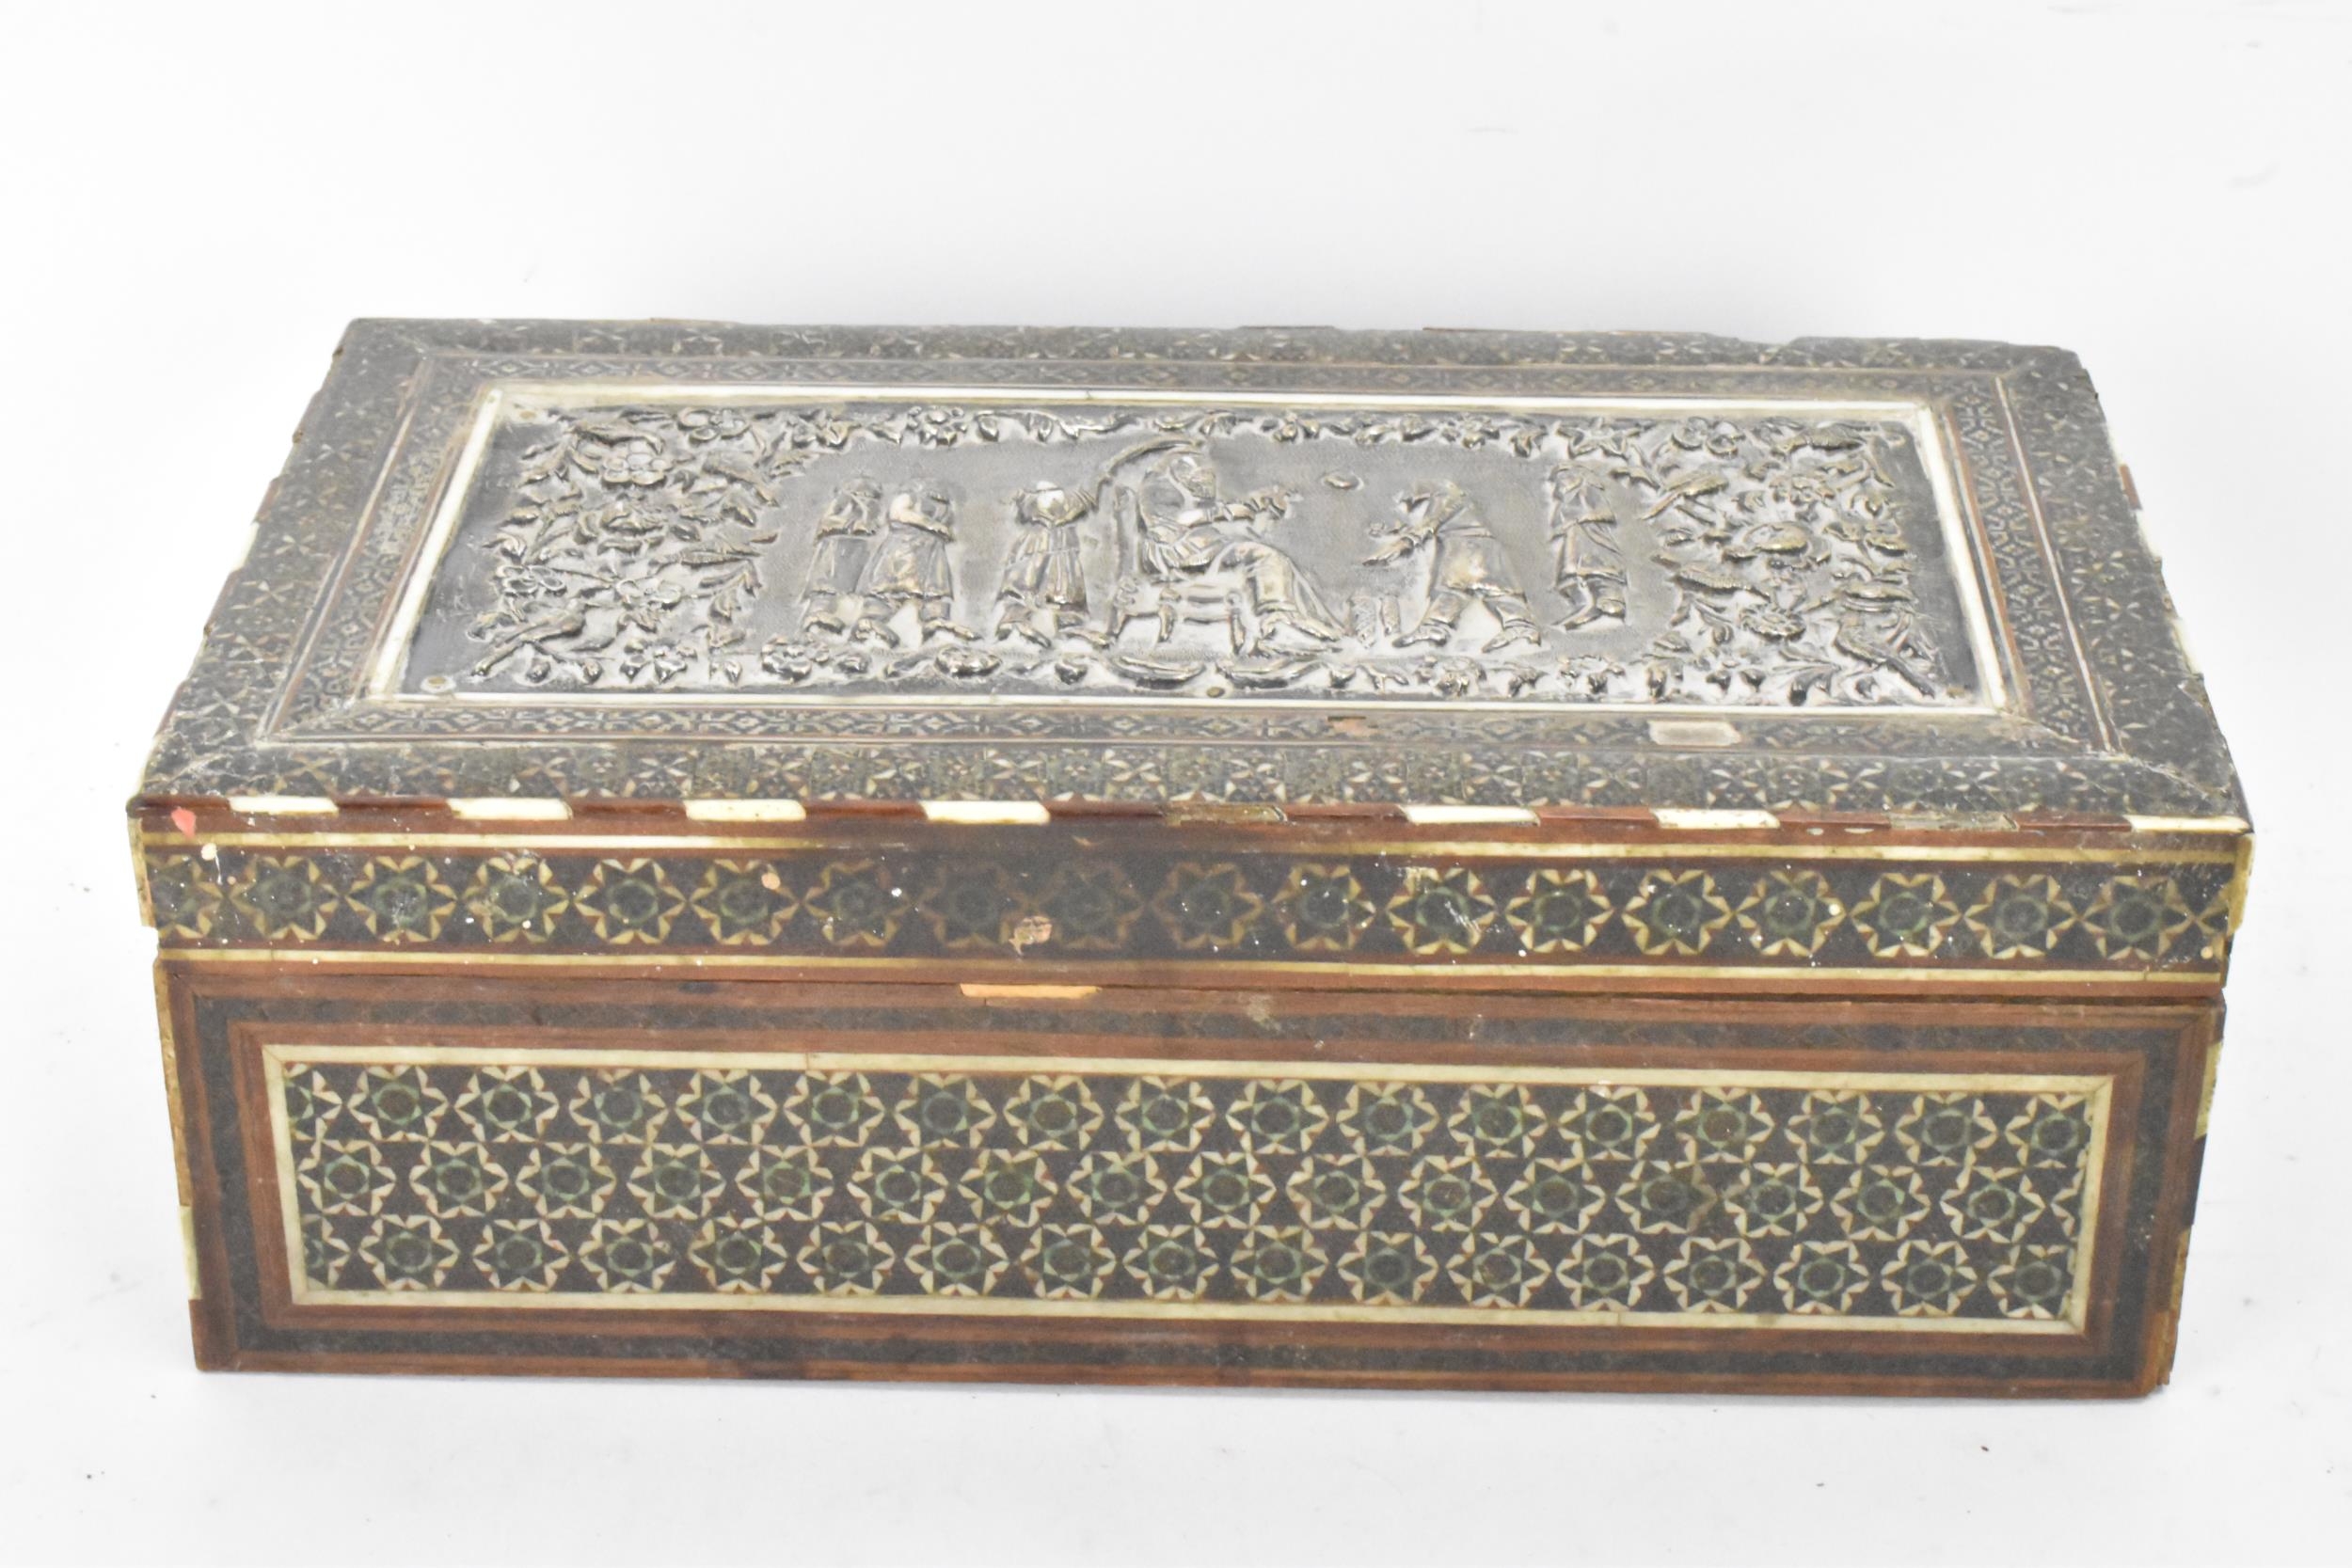 A late 19th century Indo-Persian cigarette box, decorated with a silver repousse panel to the lid